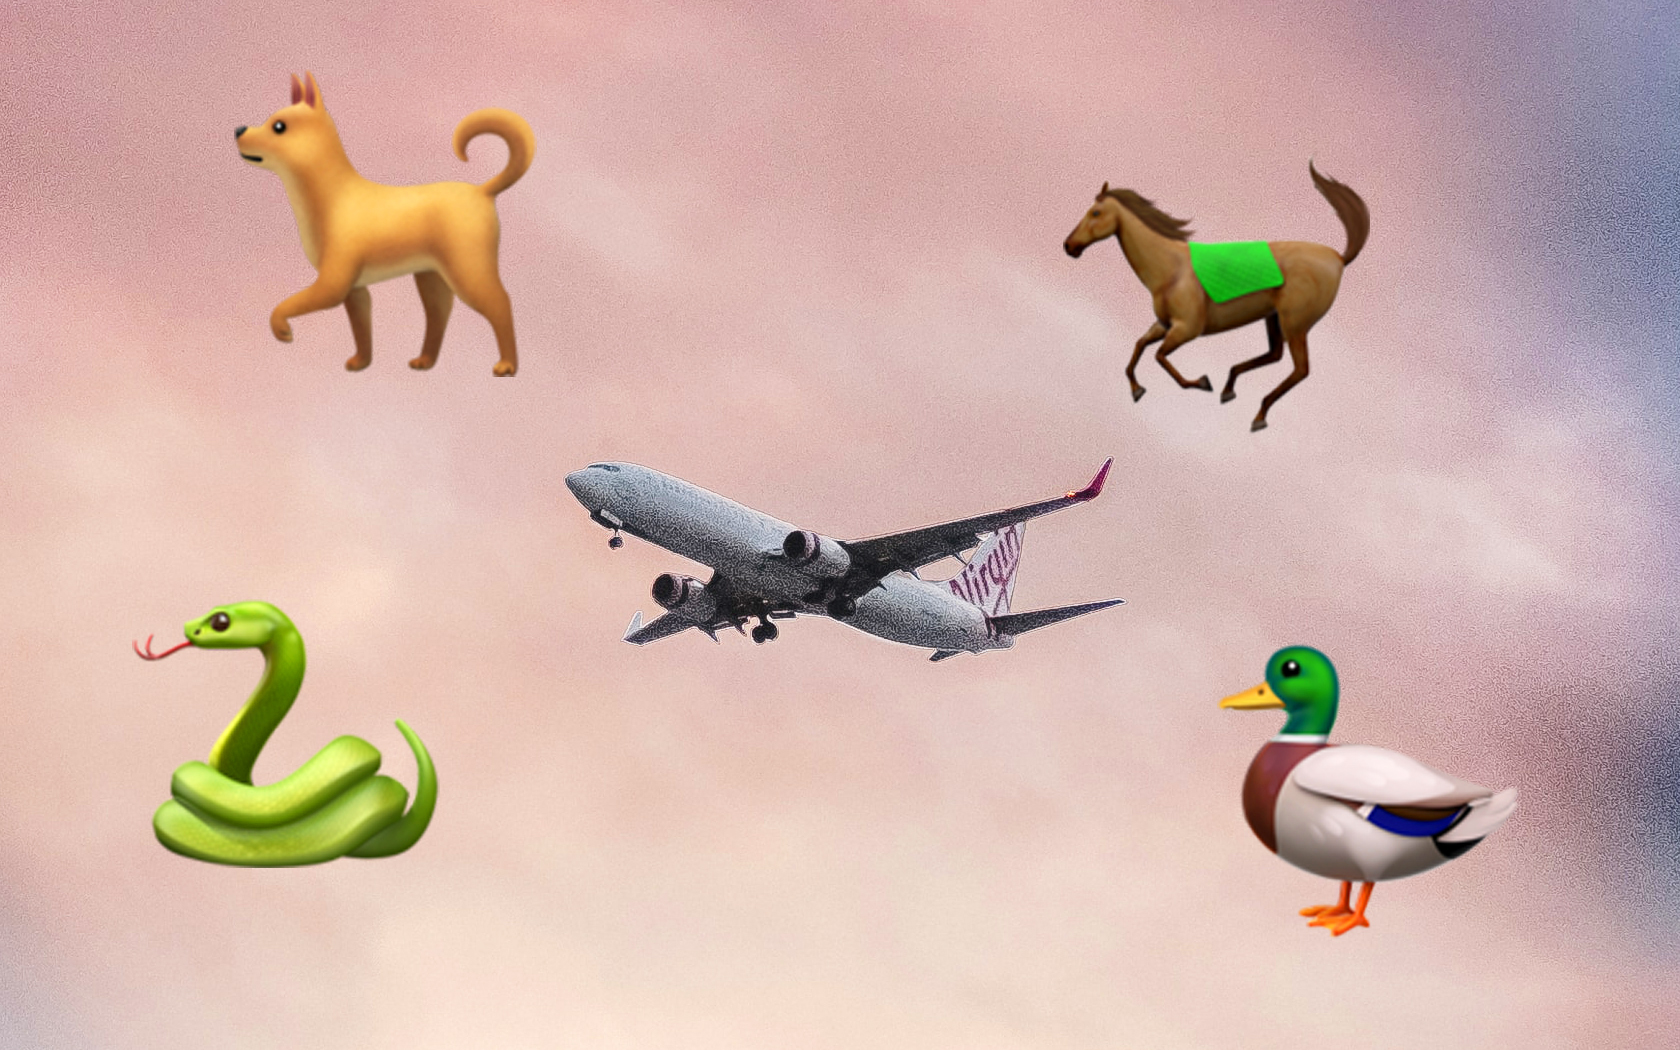 Animals On Planes: Ranking The Animals People Have Taken On Planes